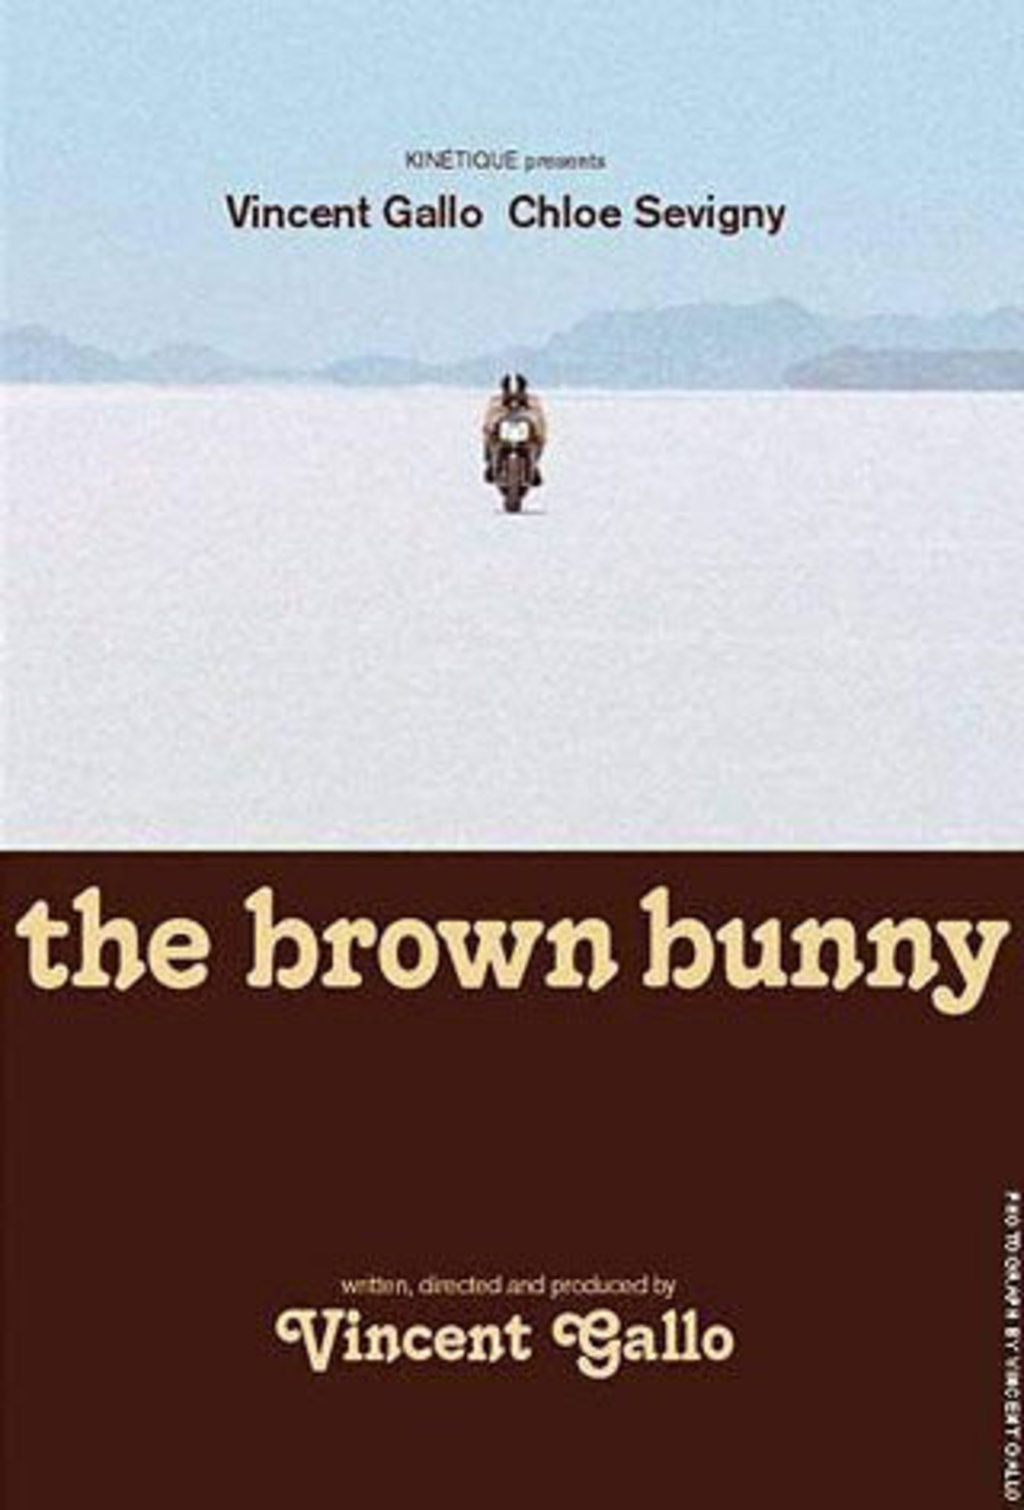 The Brown Bunny Full Movie